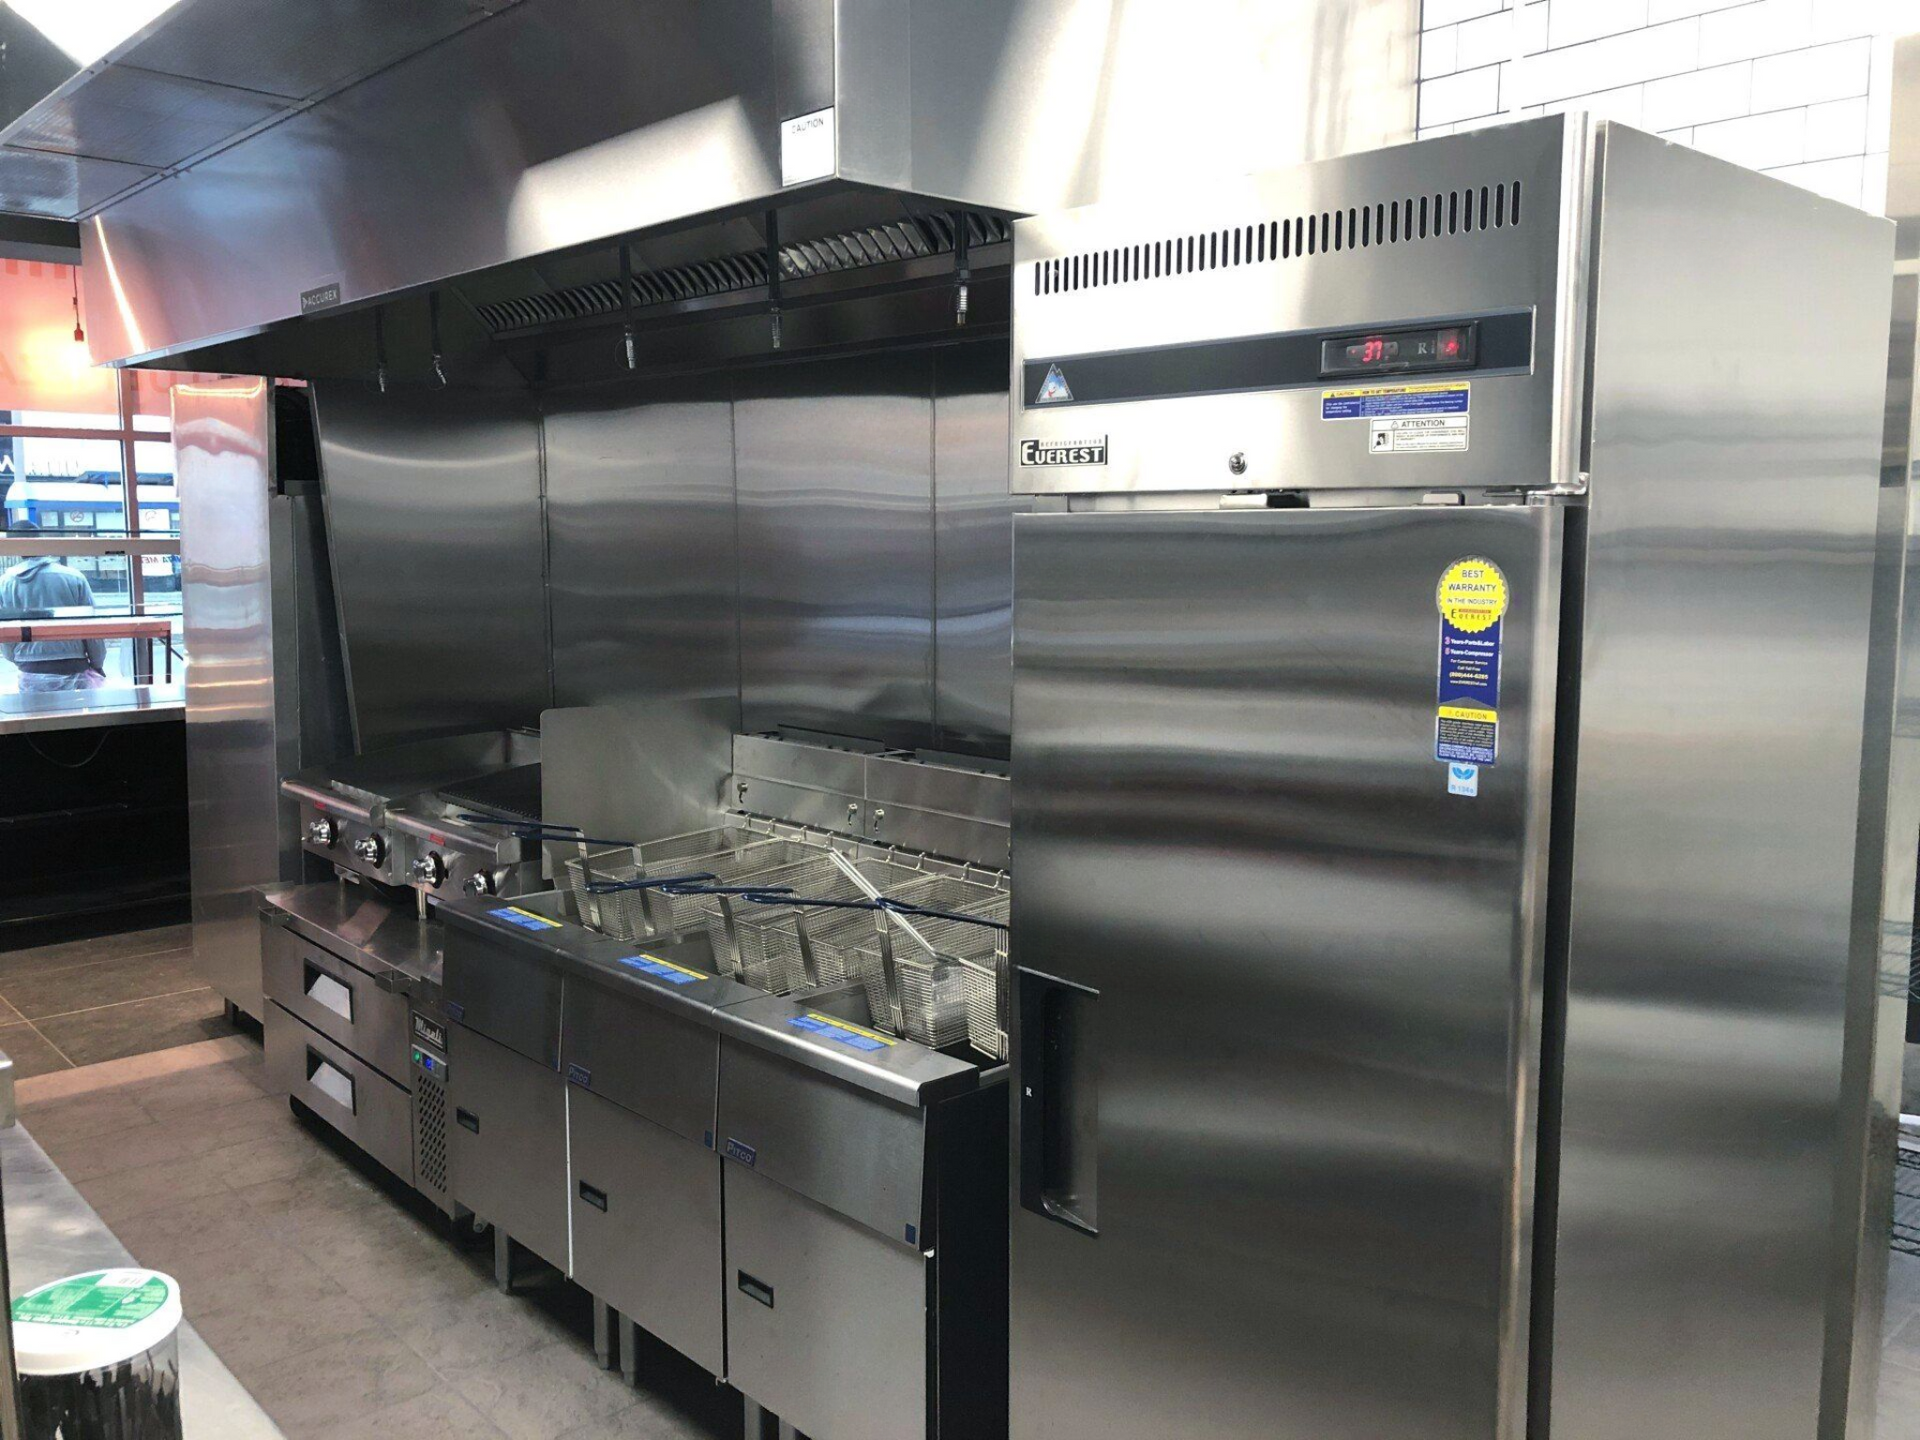 a stainless steel refrigerator, fryer, and stove 